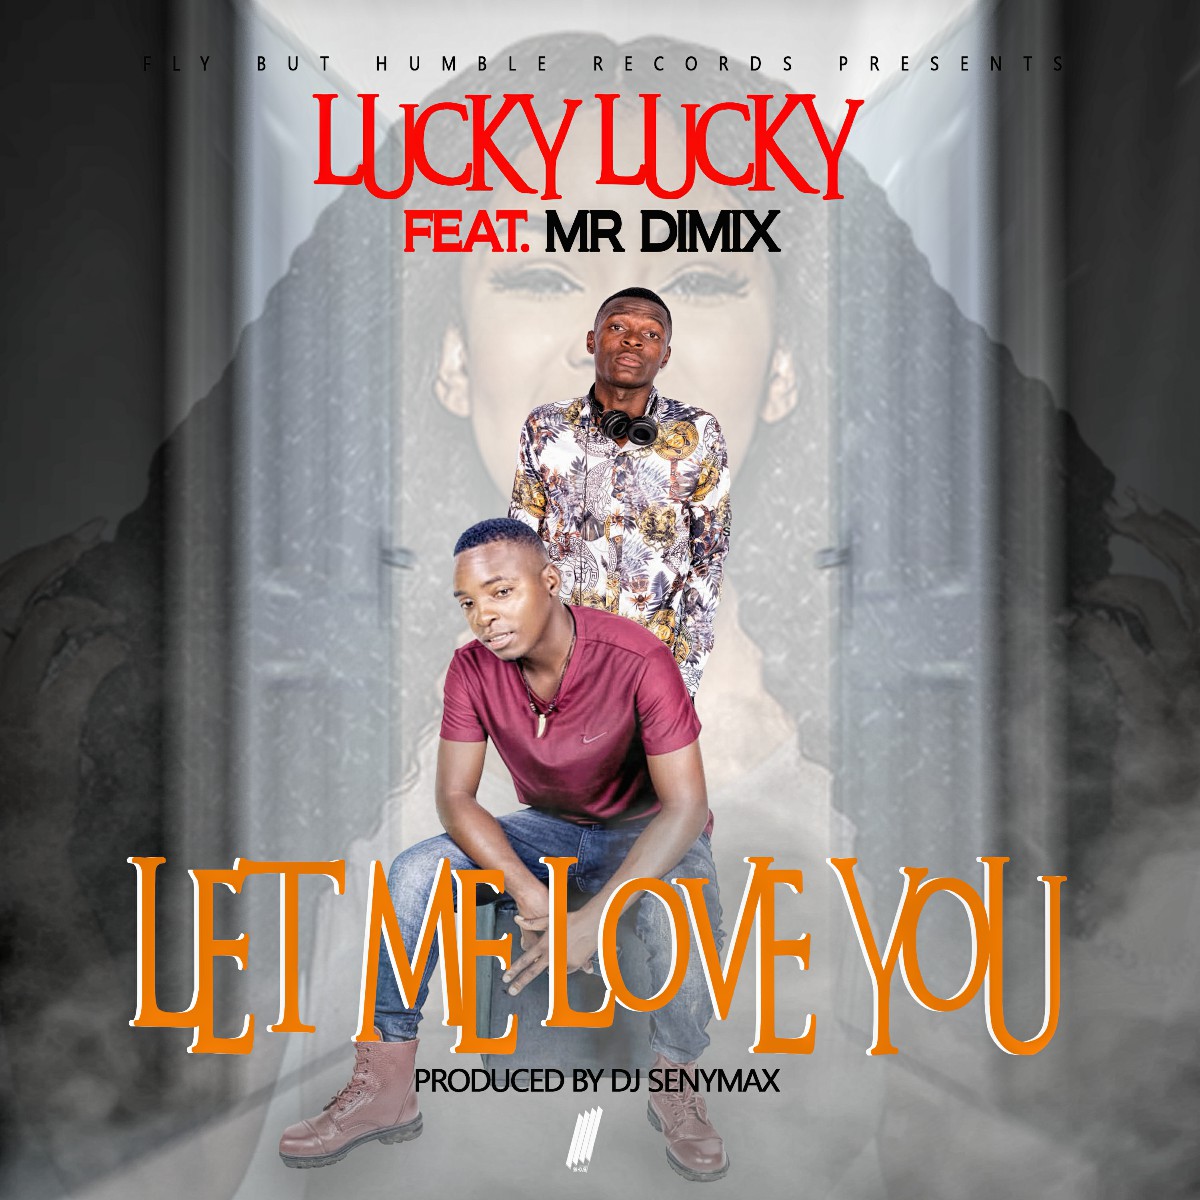 Lucky Lucky ft. Mr Dimix - Let Me Love You